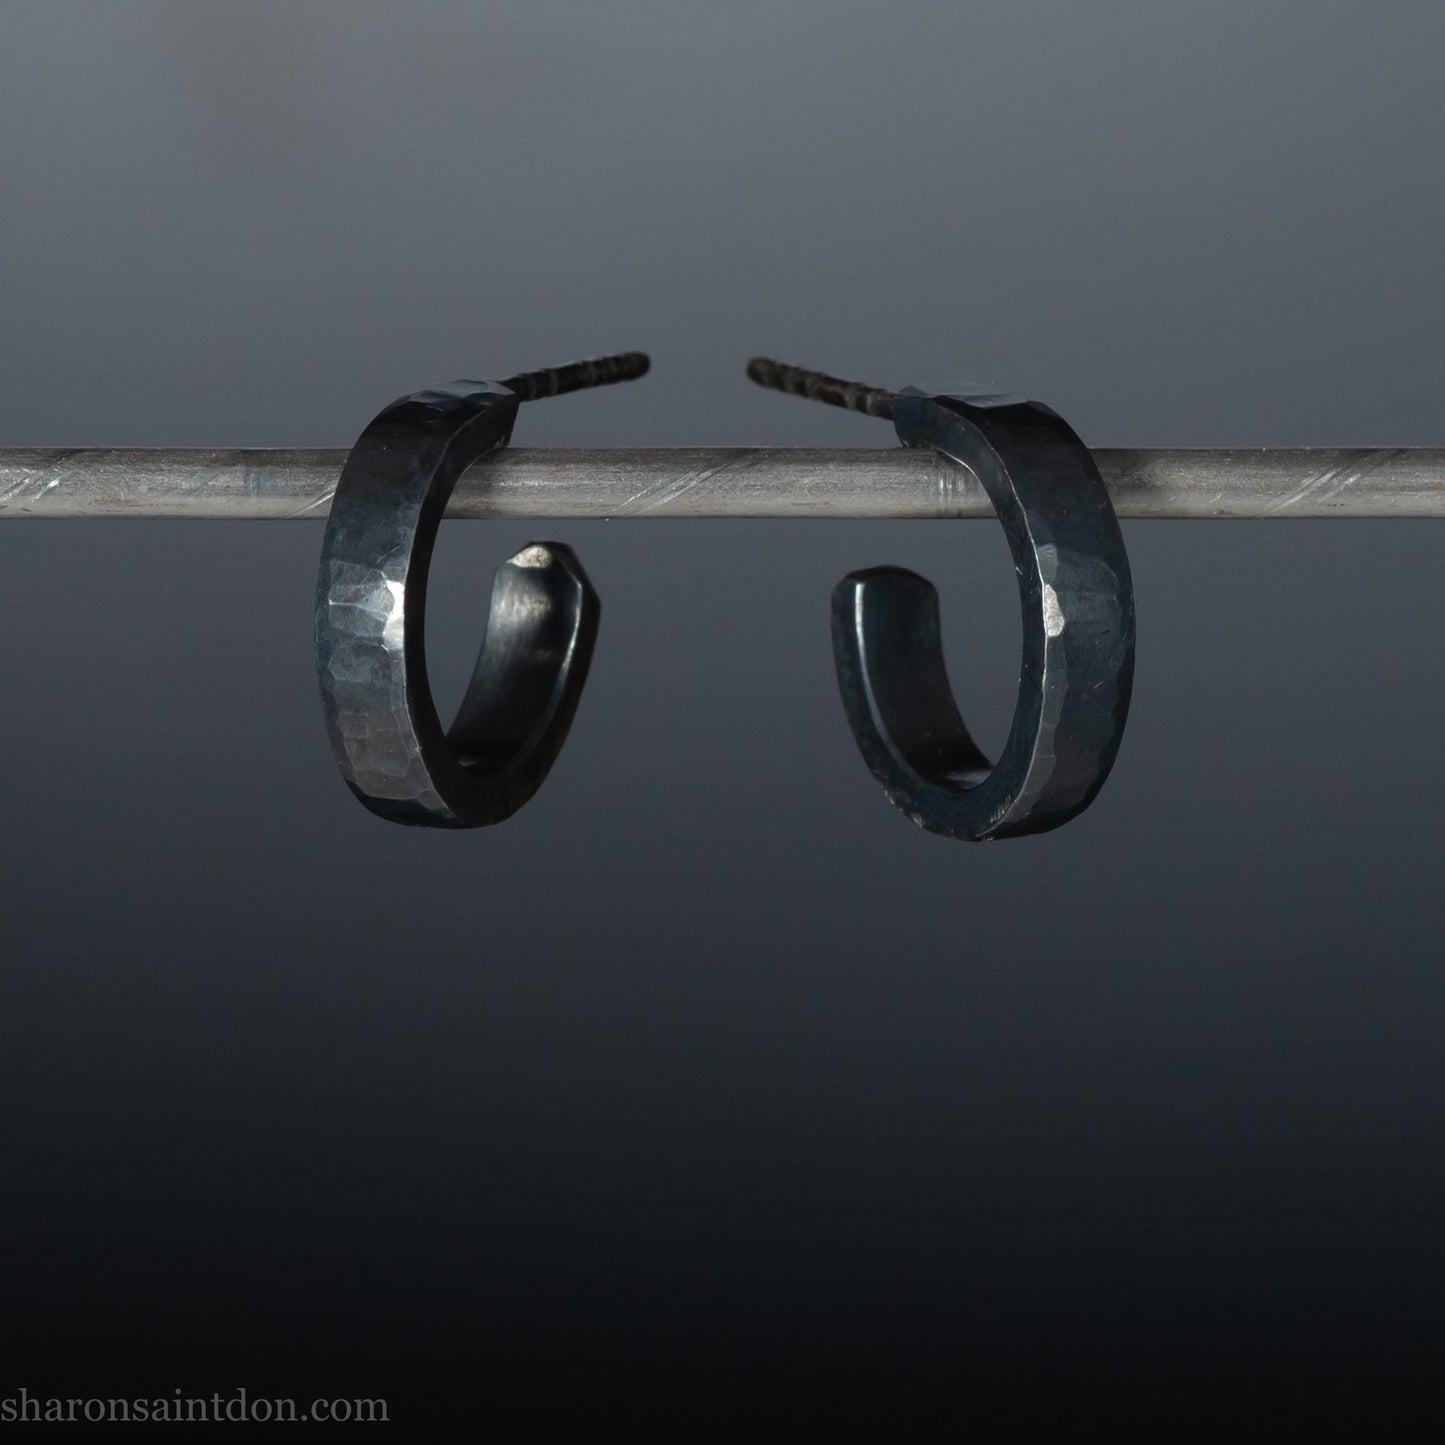 Handmade 925 sterling silver hoop earrings for men or women. 16mm x 3mm, round, oxidized black earrings with hammered texture, made by Sharon SaintDon in North America.